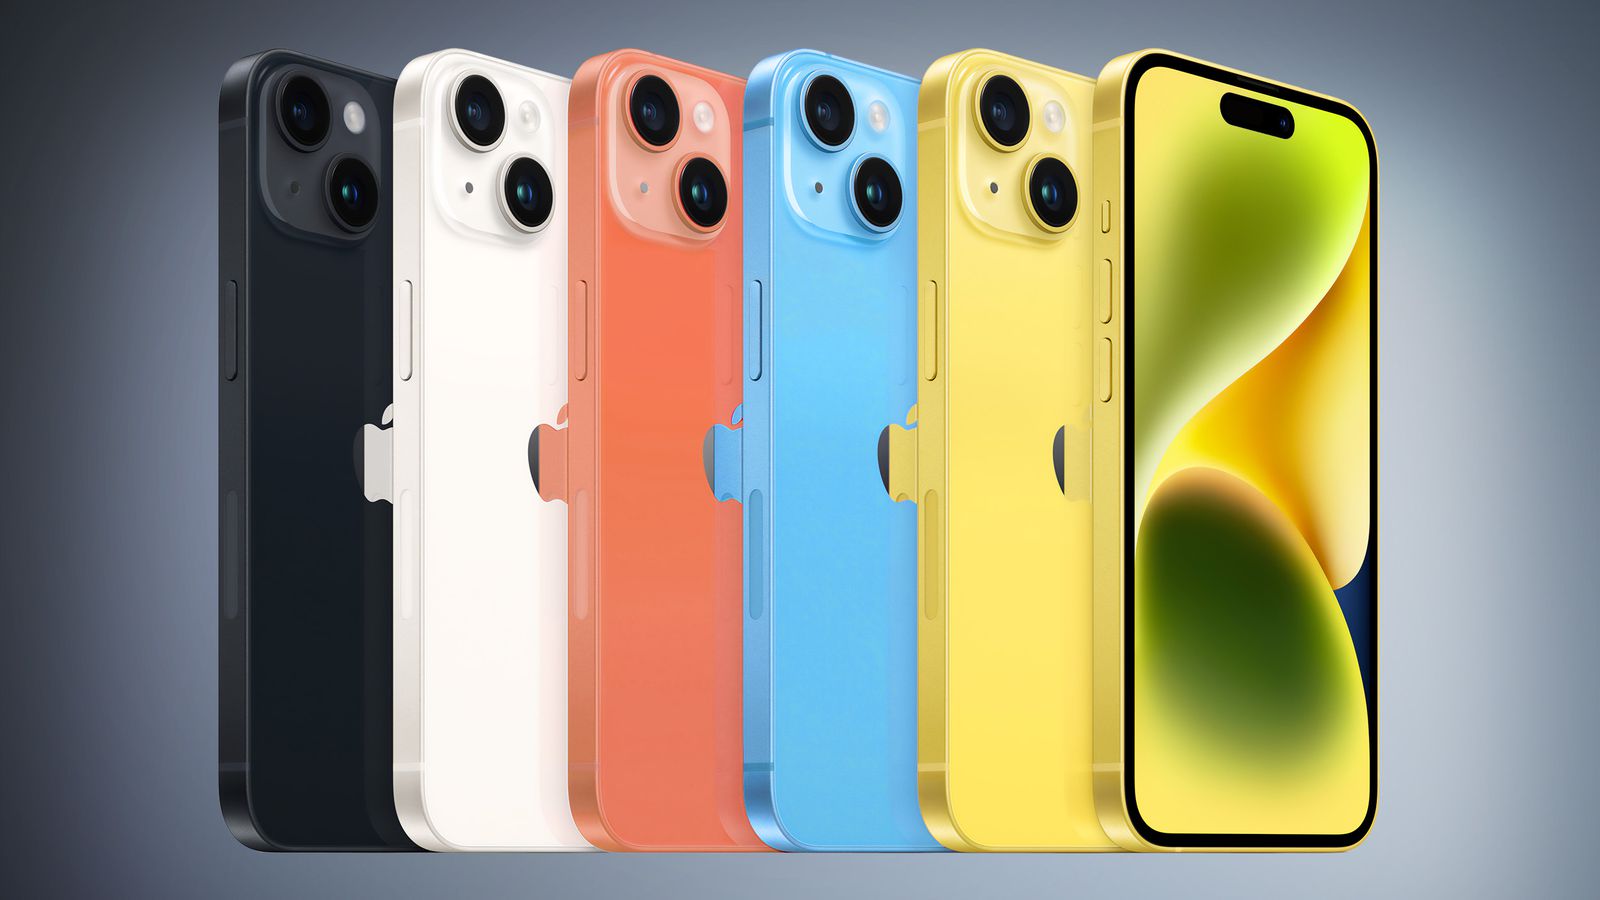 https://images.macrumors.com/t/RGu7HaHNKPmdS2pw-LQI_w9EF0E=/1600x0/article-new/2023/08/iPhone-15-Colors-Mock-2-Feature.jpg